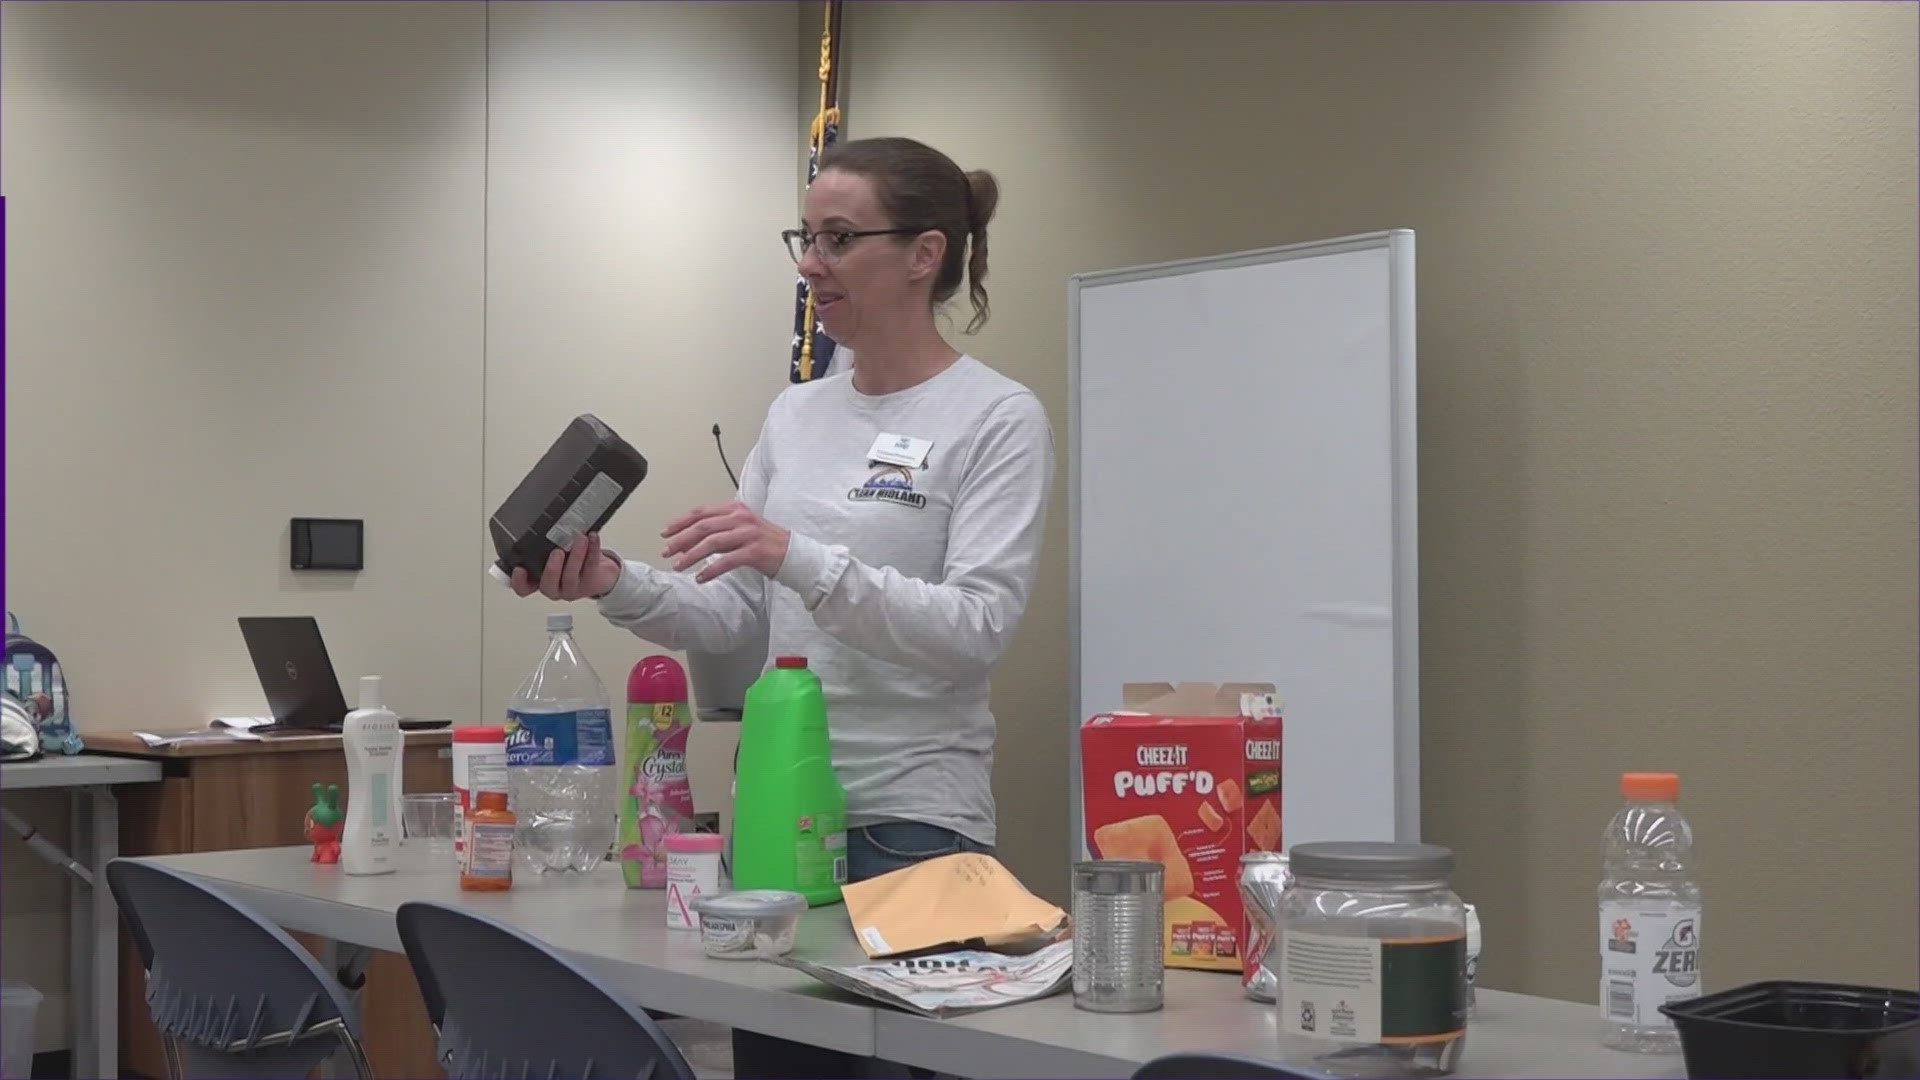 Tips on everything recycling were discussed at Centennial Park for Keep Midland Beautiful's Lunch & Learn.